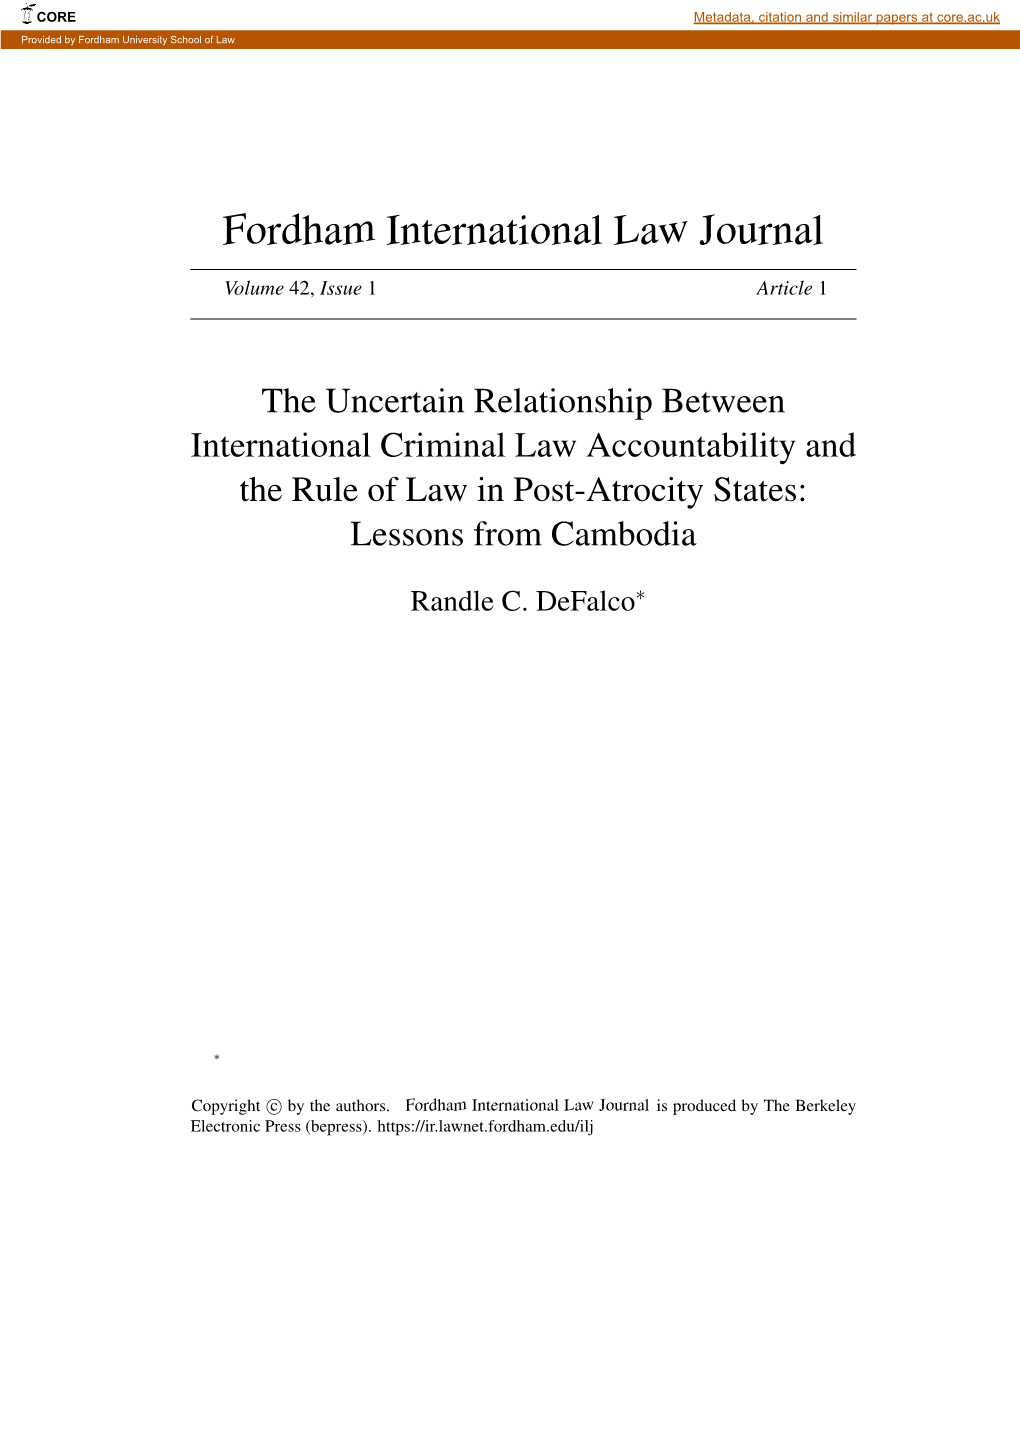 The Uncertain Relationship Between International Criminal Law Accountability and the Rule of Law in Post-Atrocity States: Lessons from Cambodia